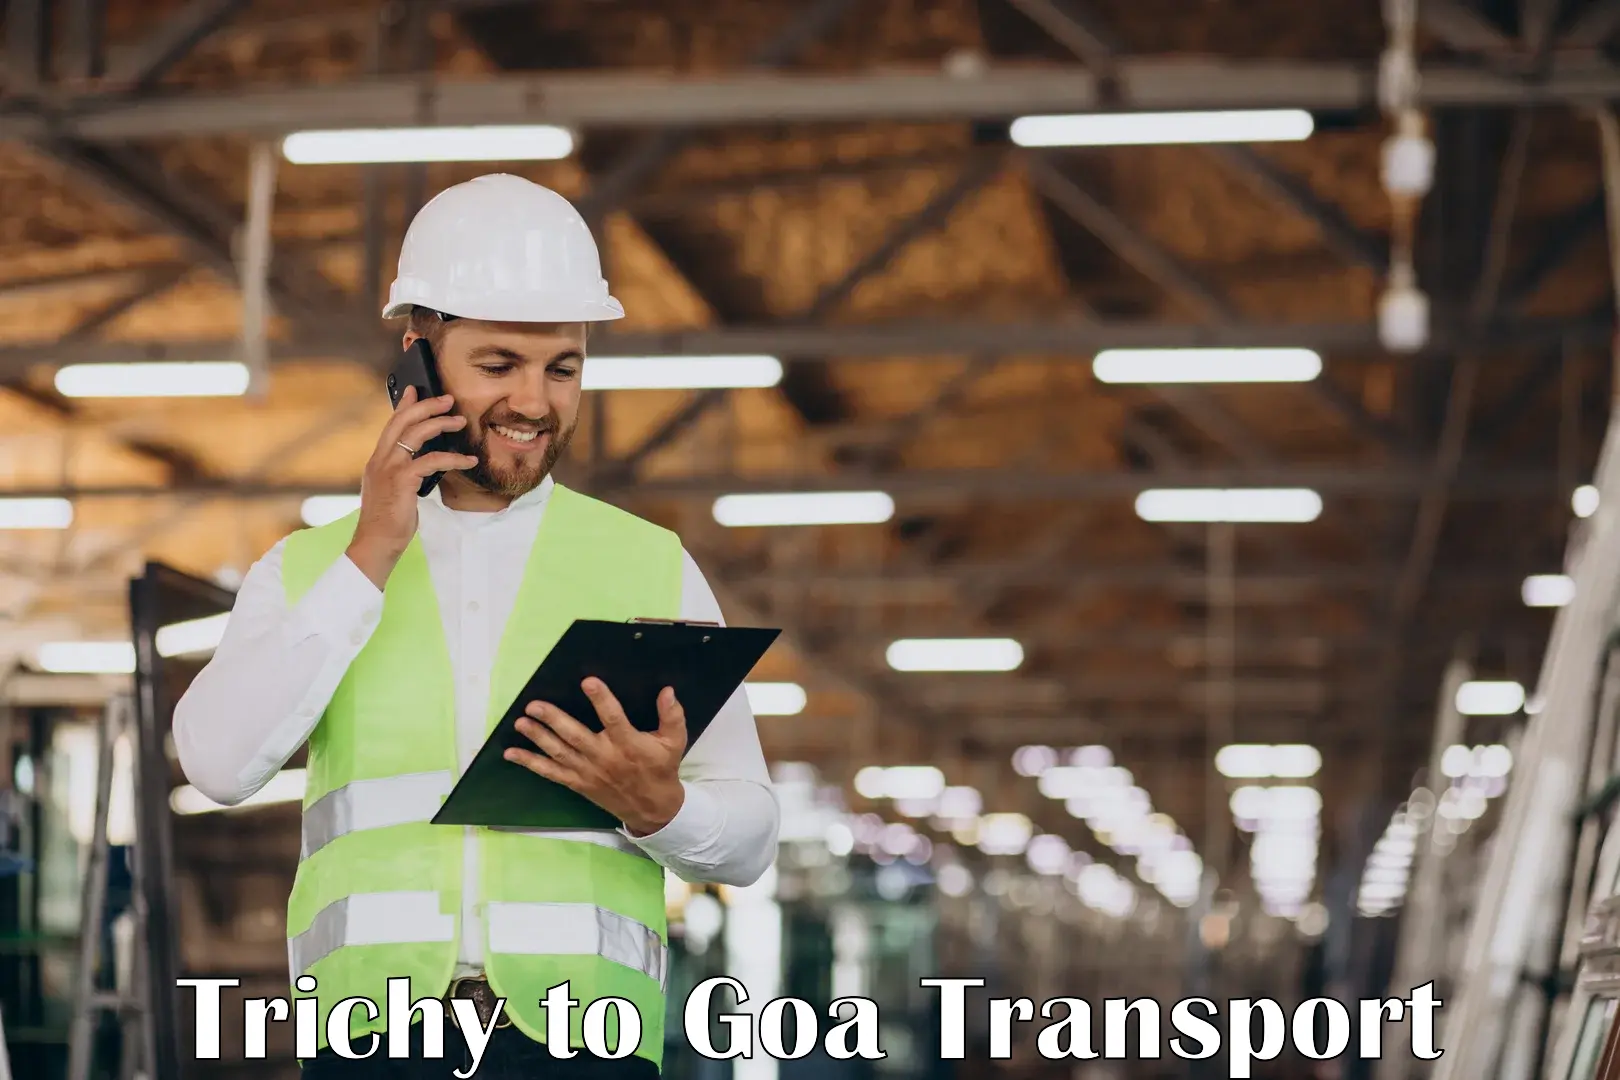 Daily transport service Trichy to Goa